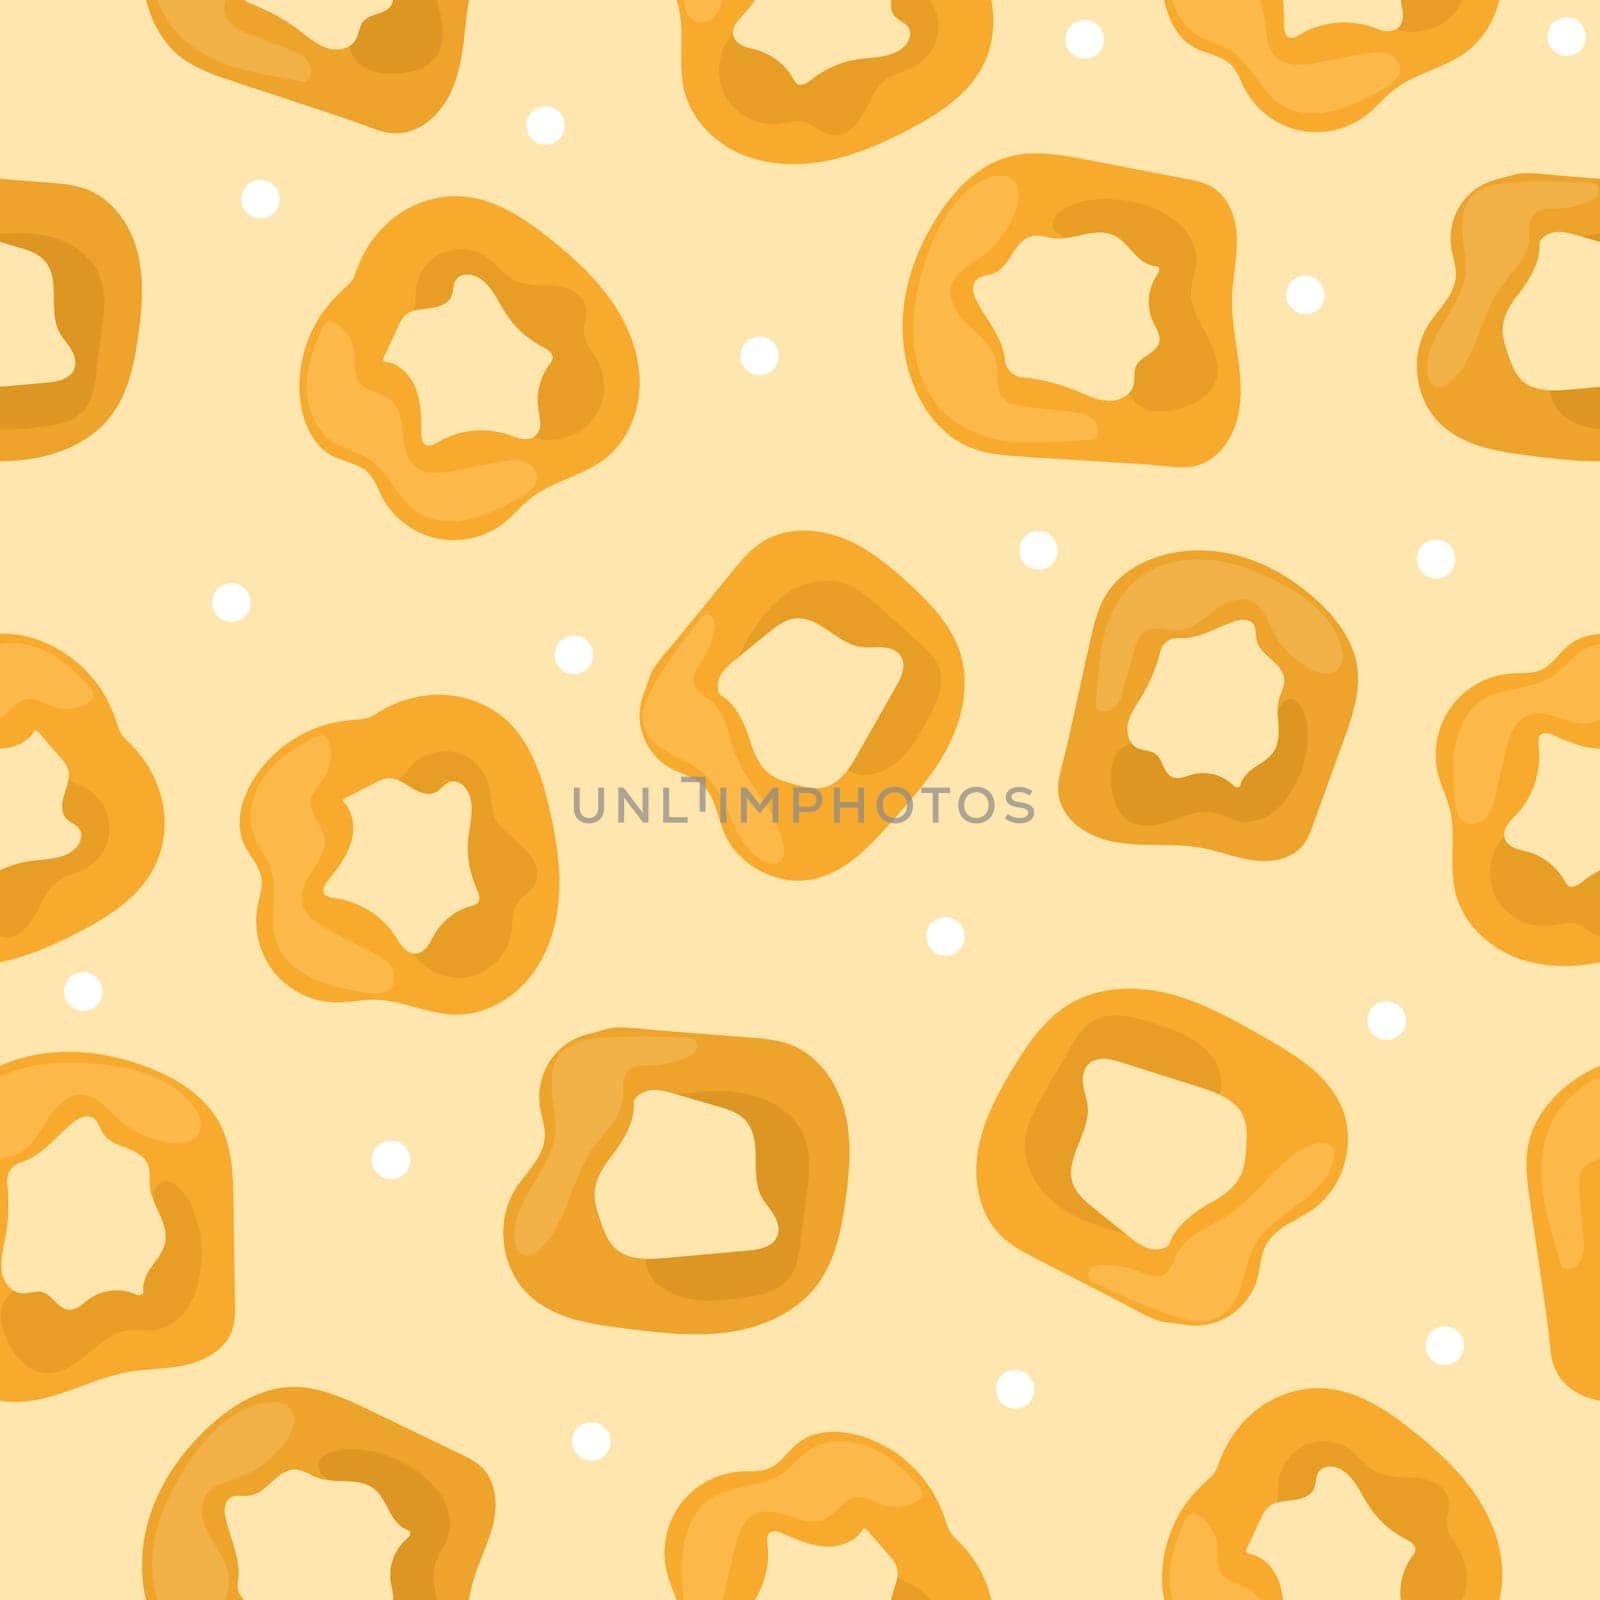 Picarones pumpkin donuts, dessert, latin american cuisine. Seamless pattern with donuts on a yellow background.